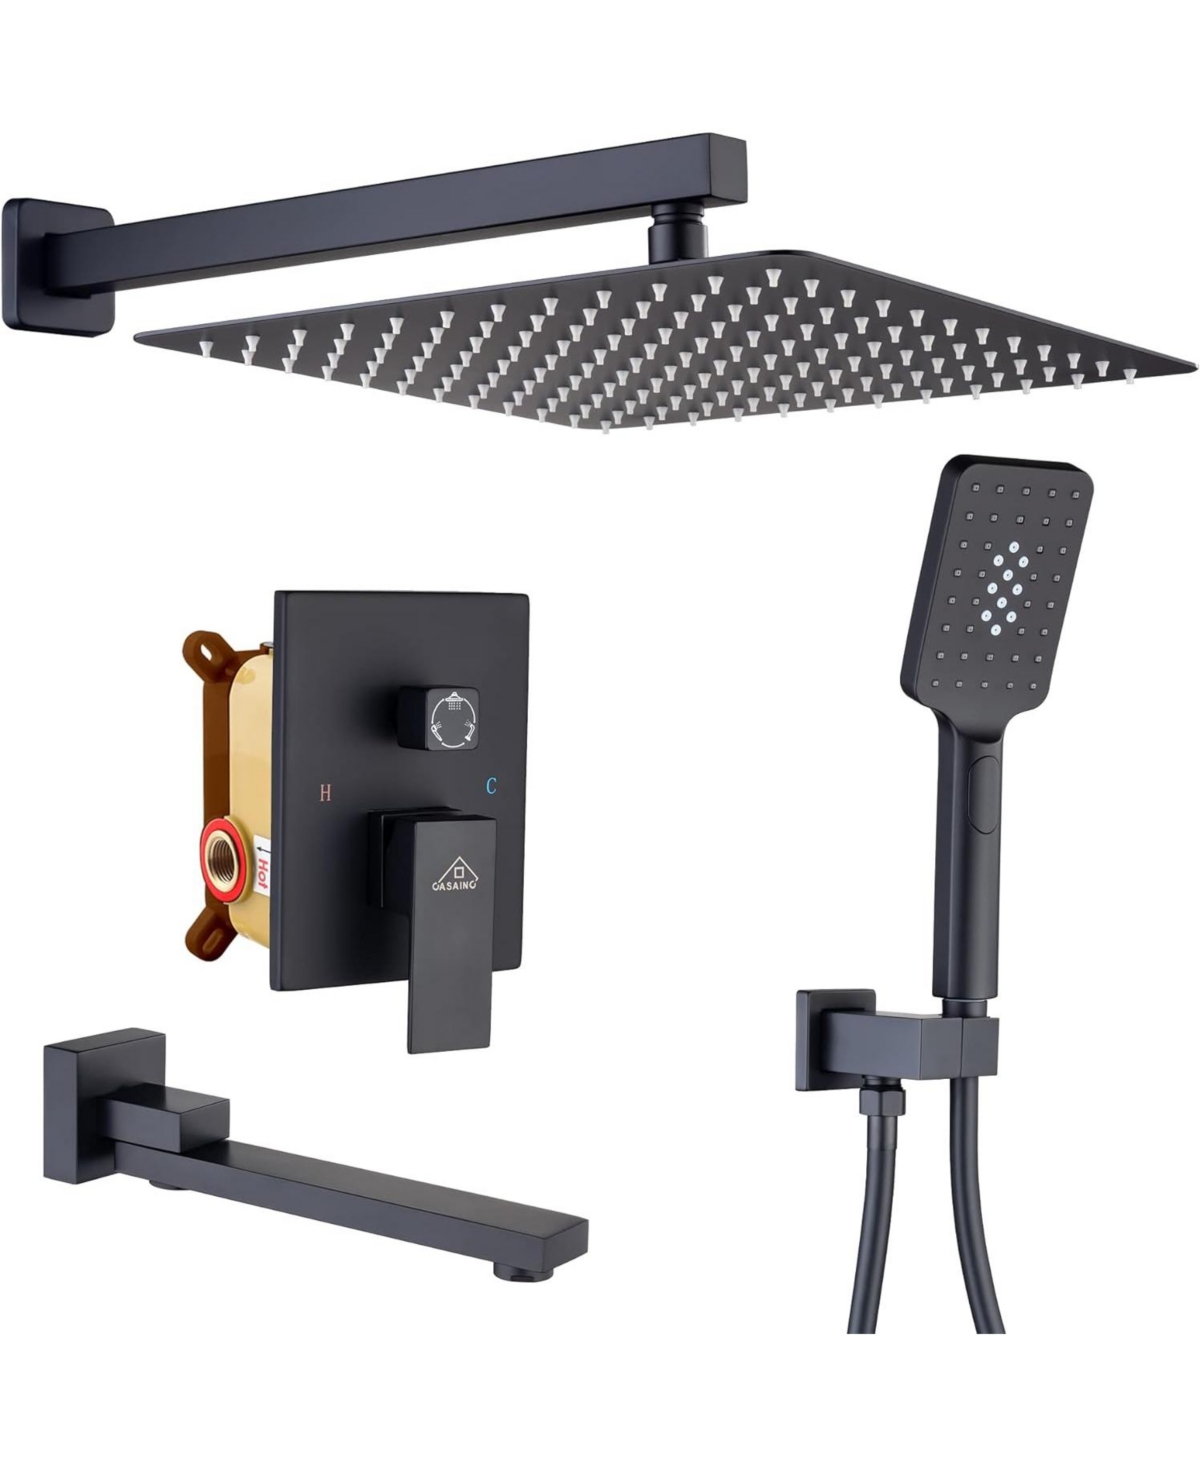 12" Inch Wall Mounted Square Shower System Set with Handheld Spray & Tub Spout - Black